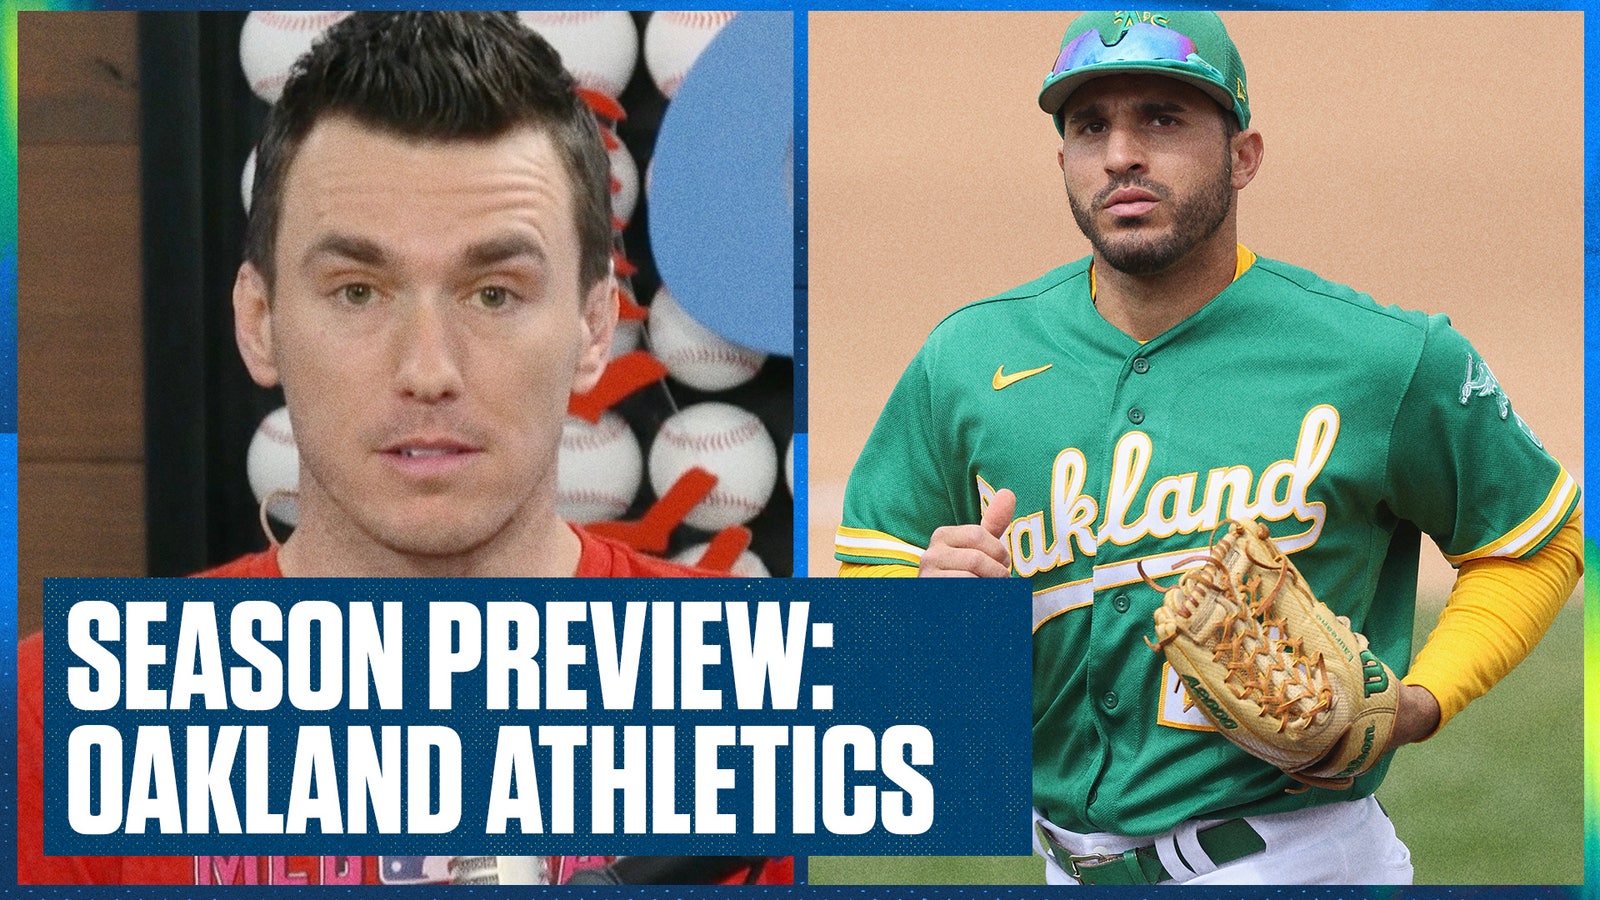 Oakland Athletics Season Preview: Who will be the bright spot this year